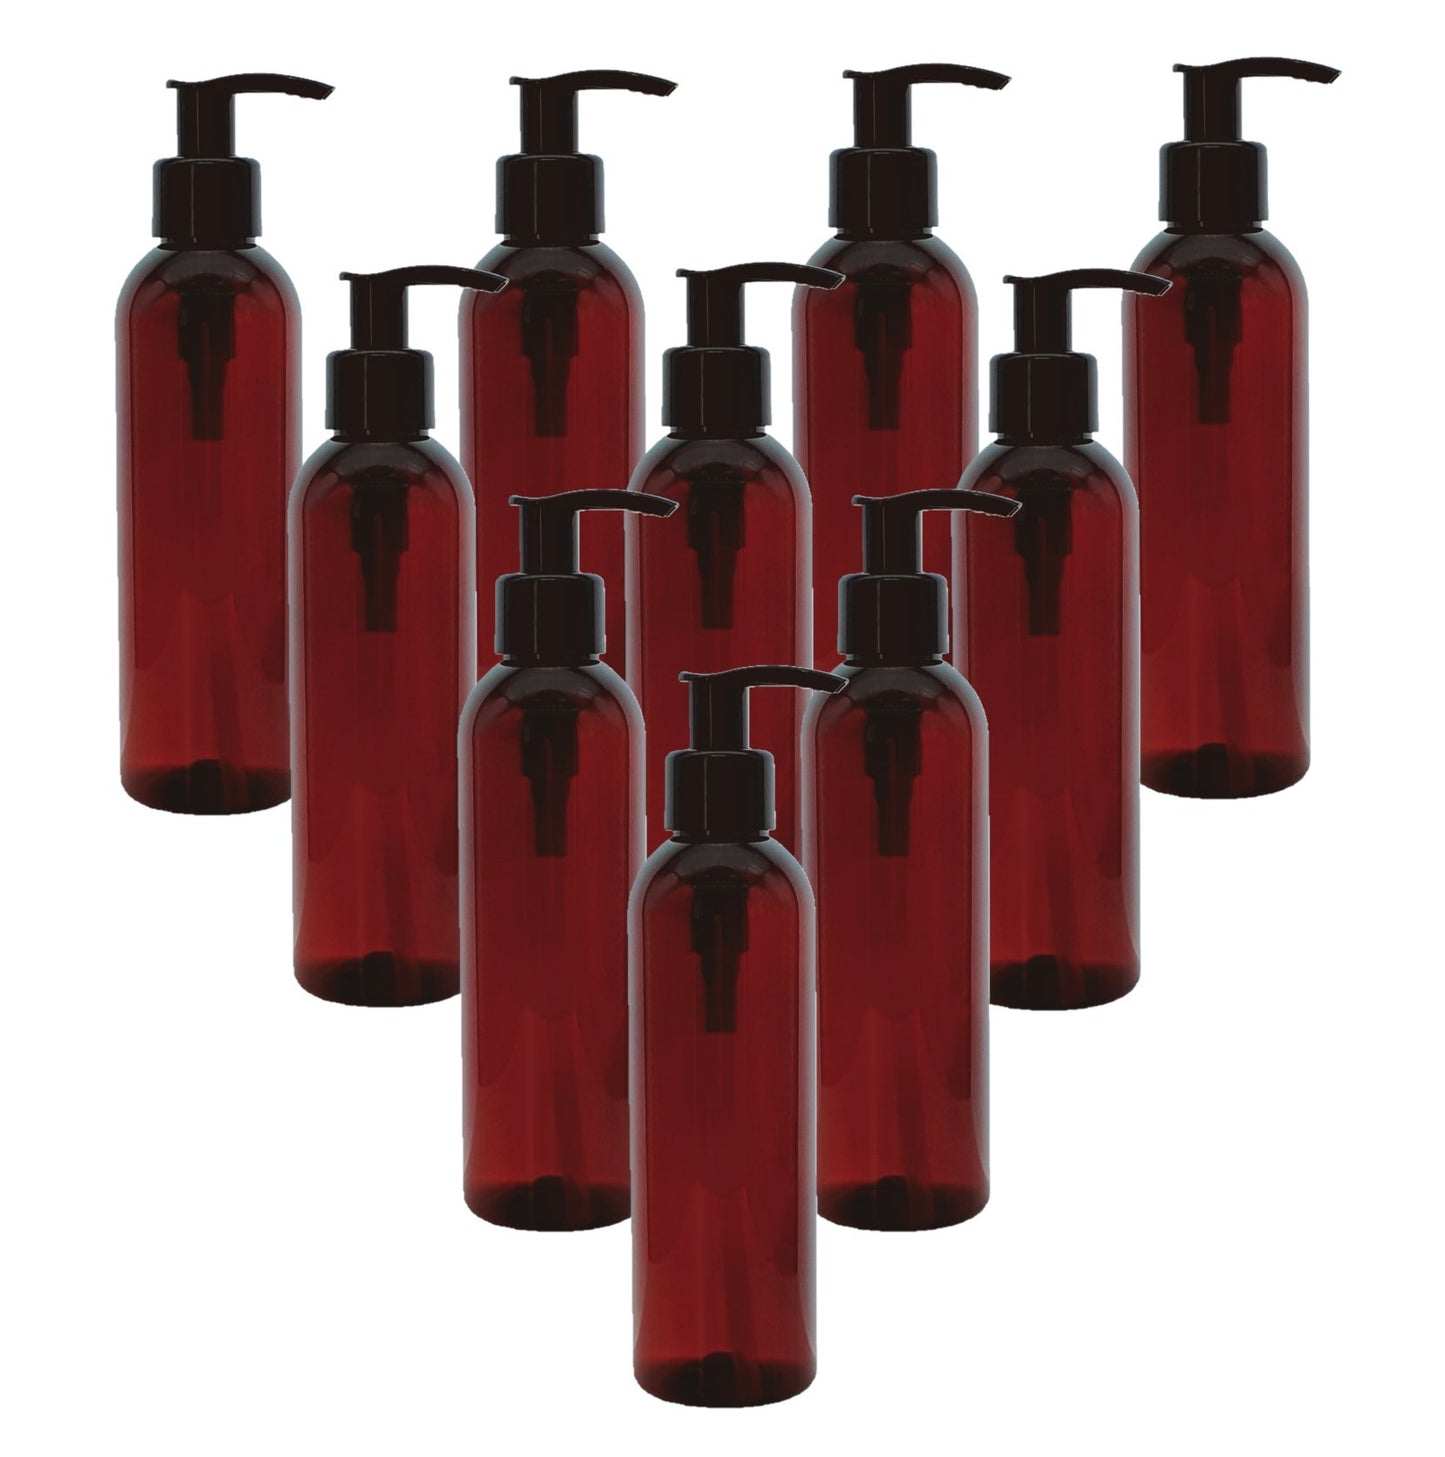 200ml Tall Amber Plastic Bottles with 24mm 410 Black Lotion Pump